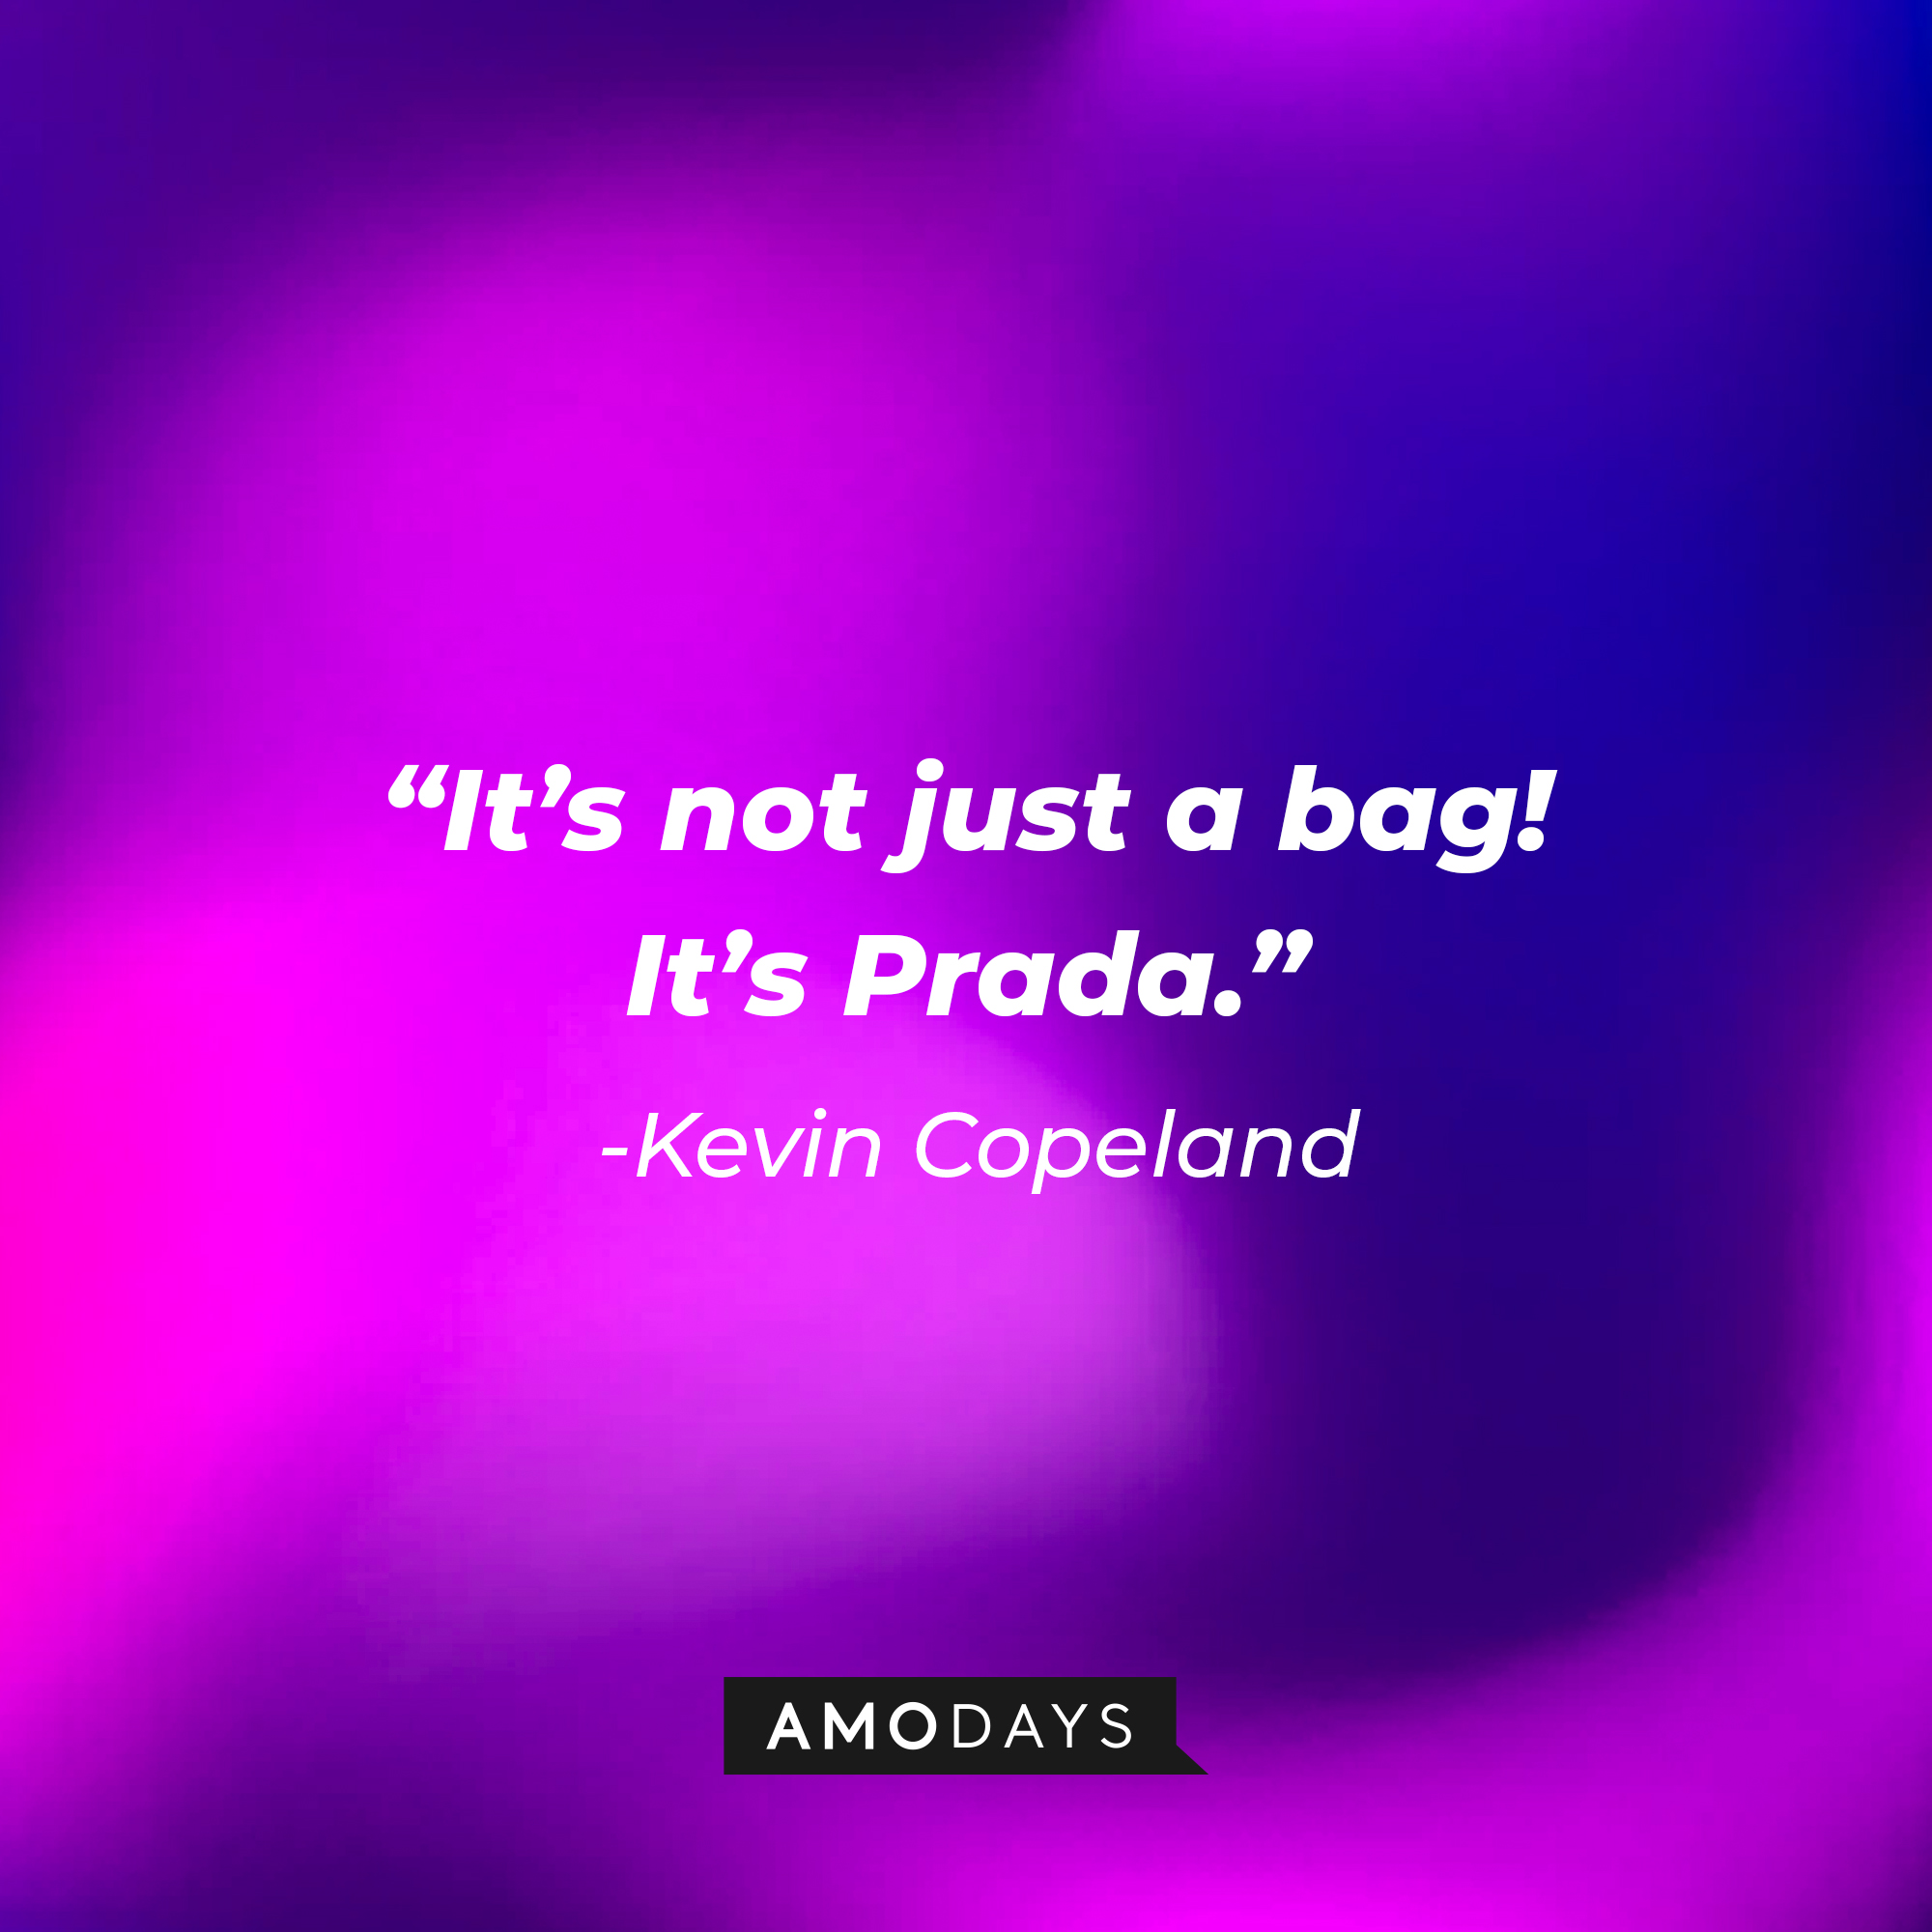 Kevin Copeland’s quote: “It’s not just a bag! It’s Prada.” | Source: AmoDays